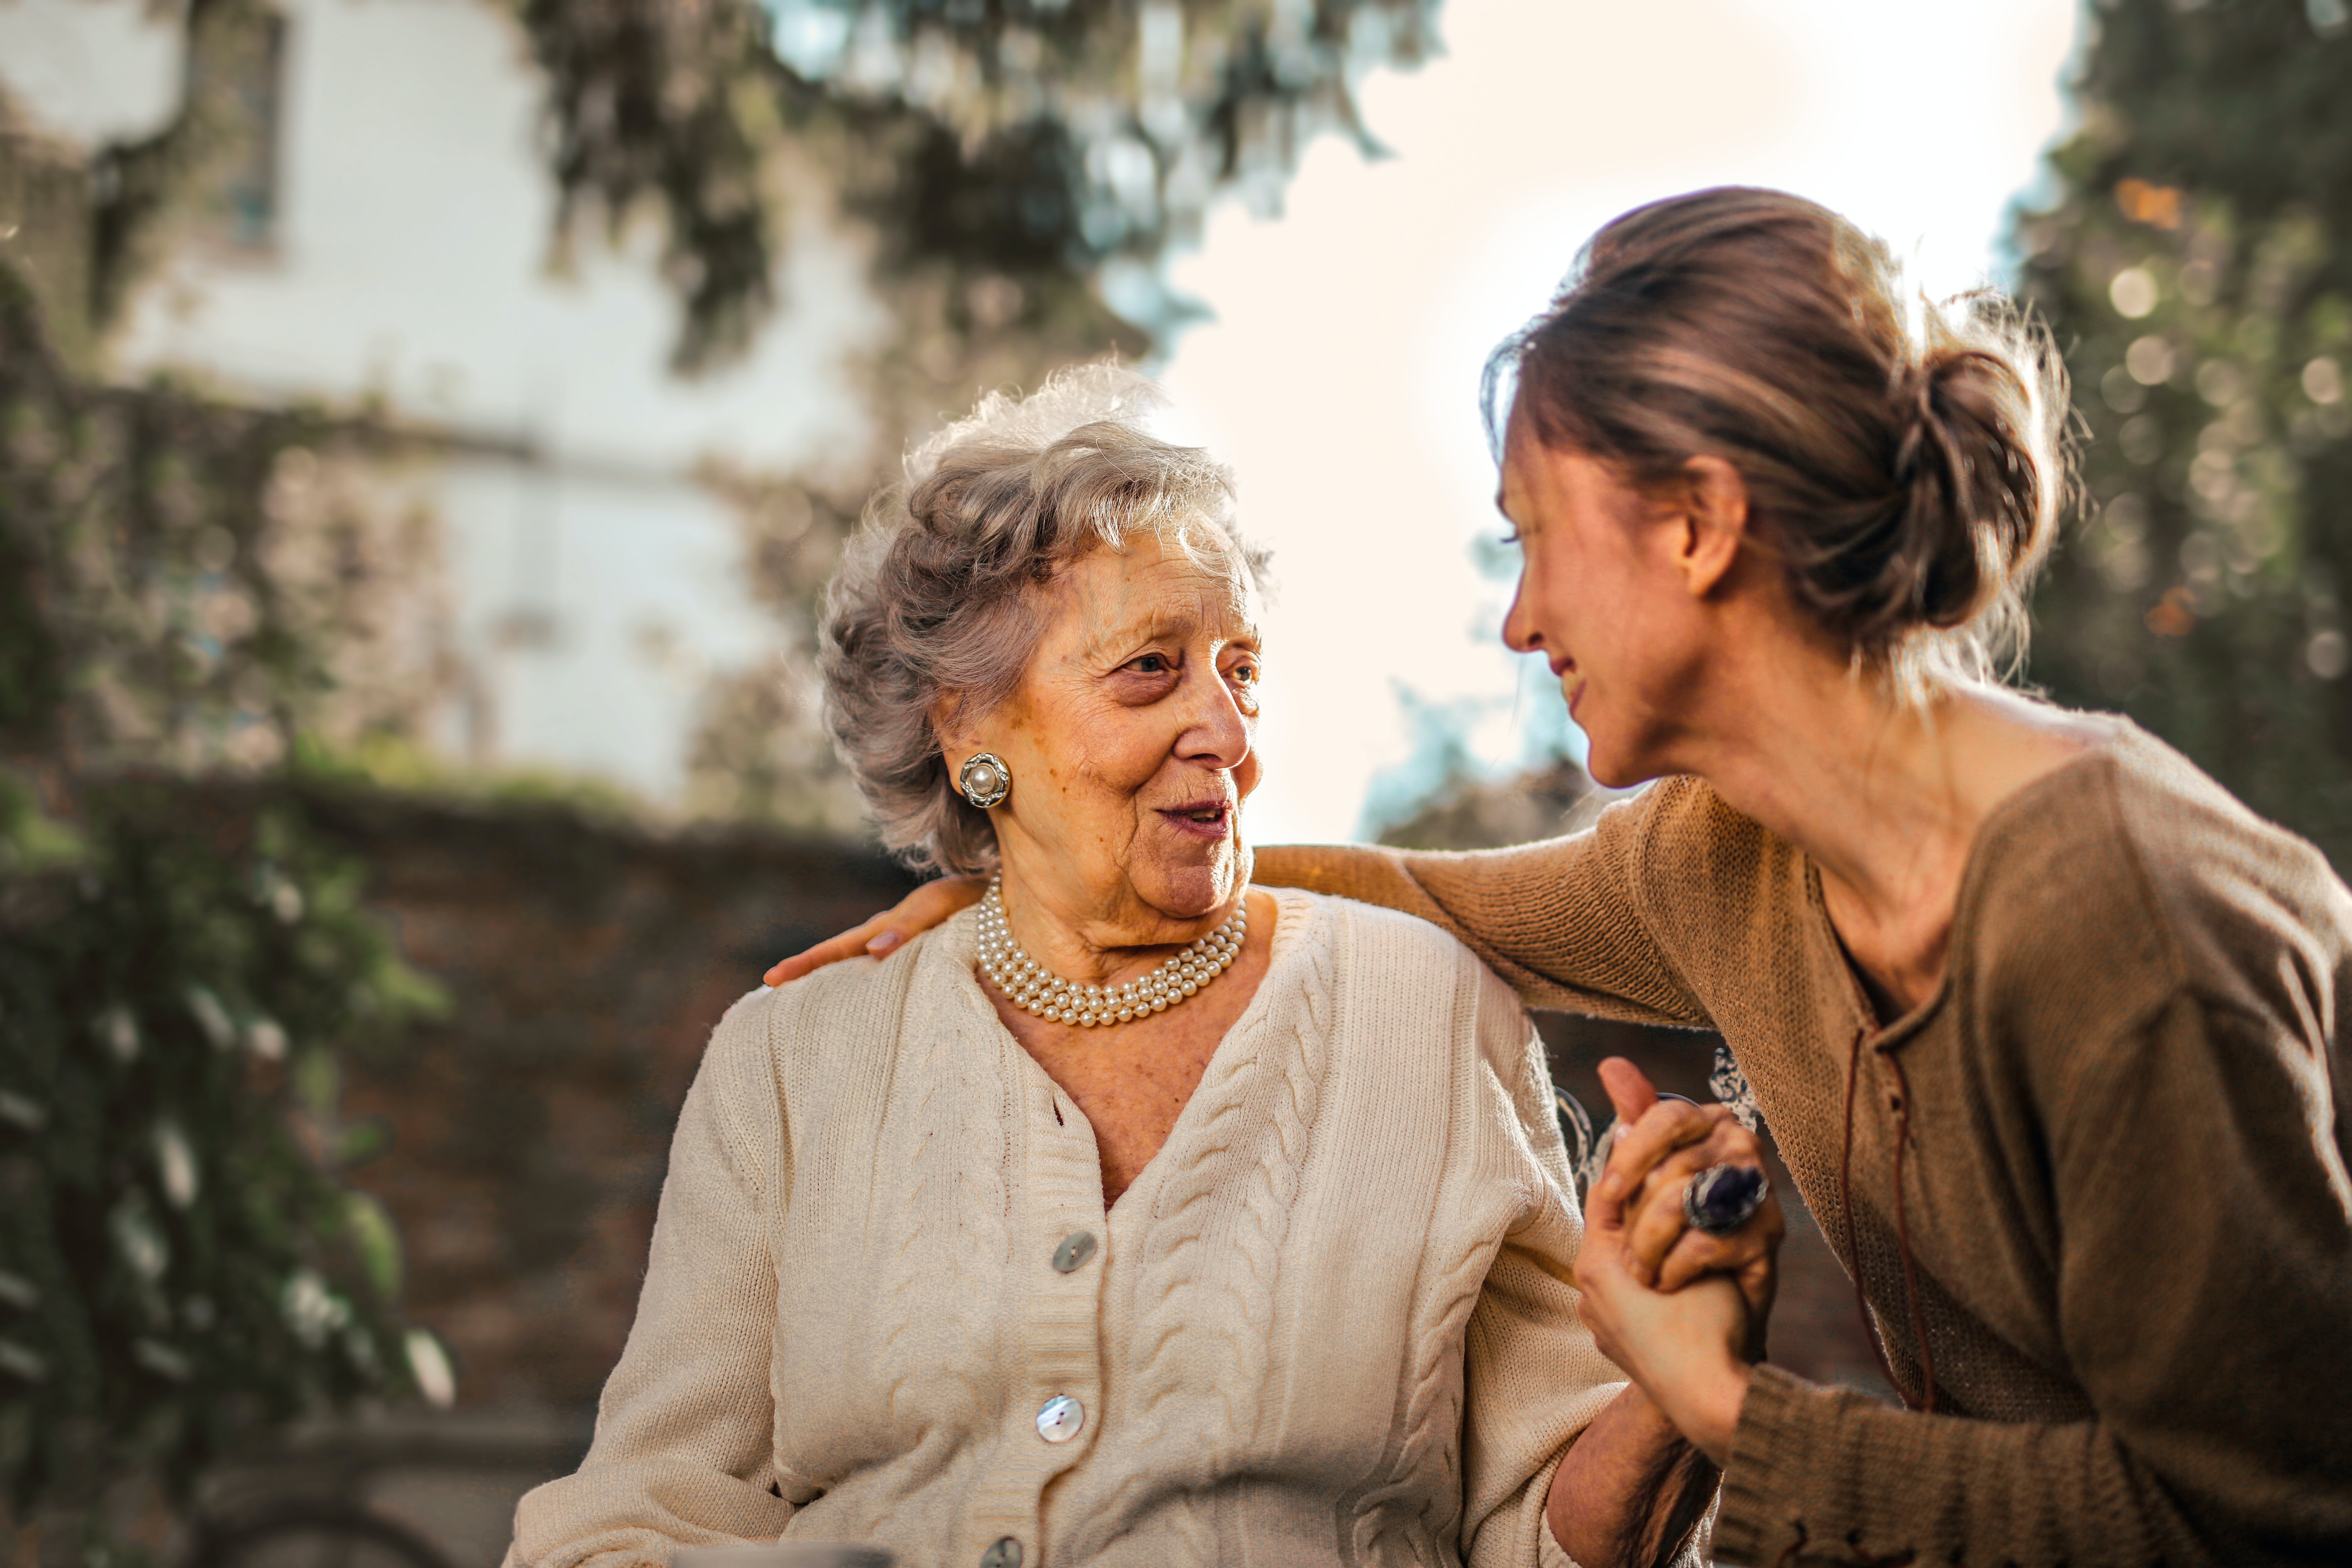 An elderly woman talking to a young woman | Source: Pexels